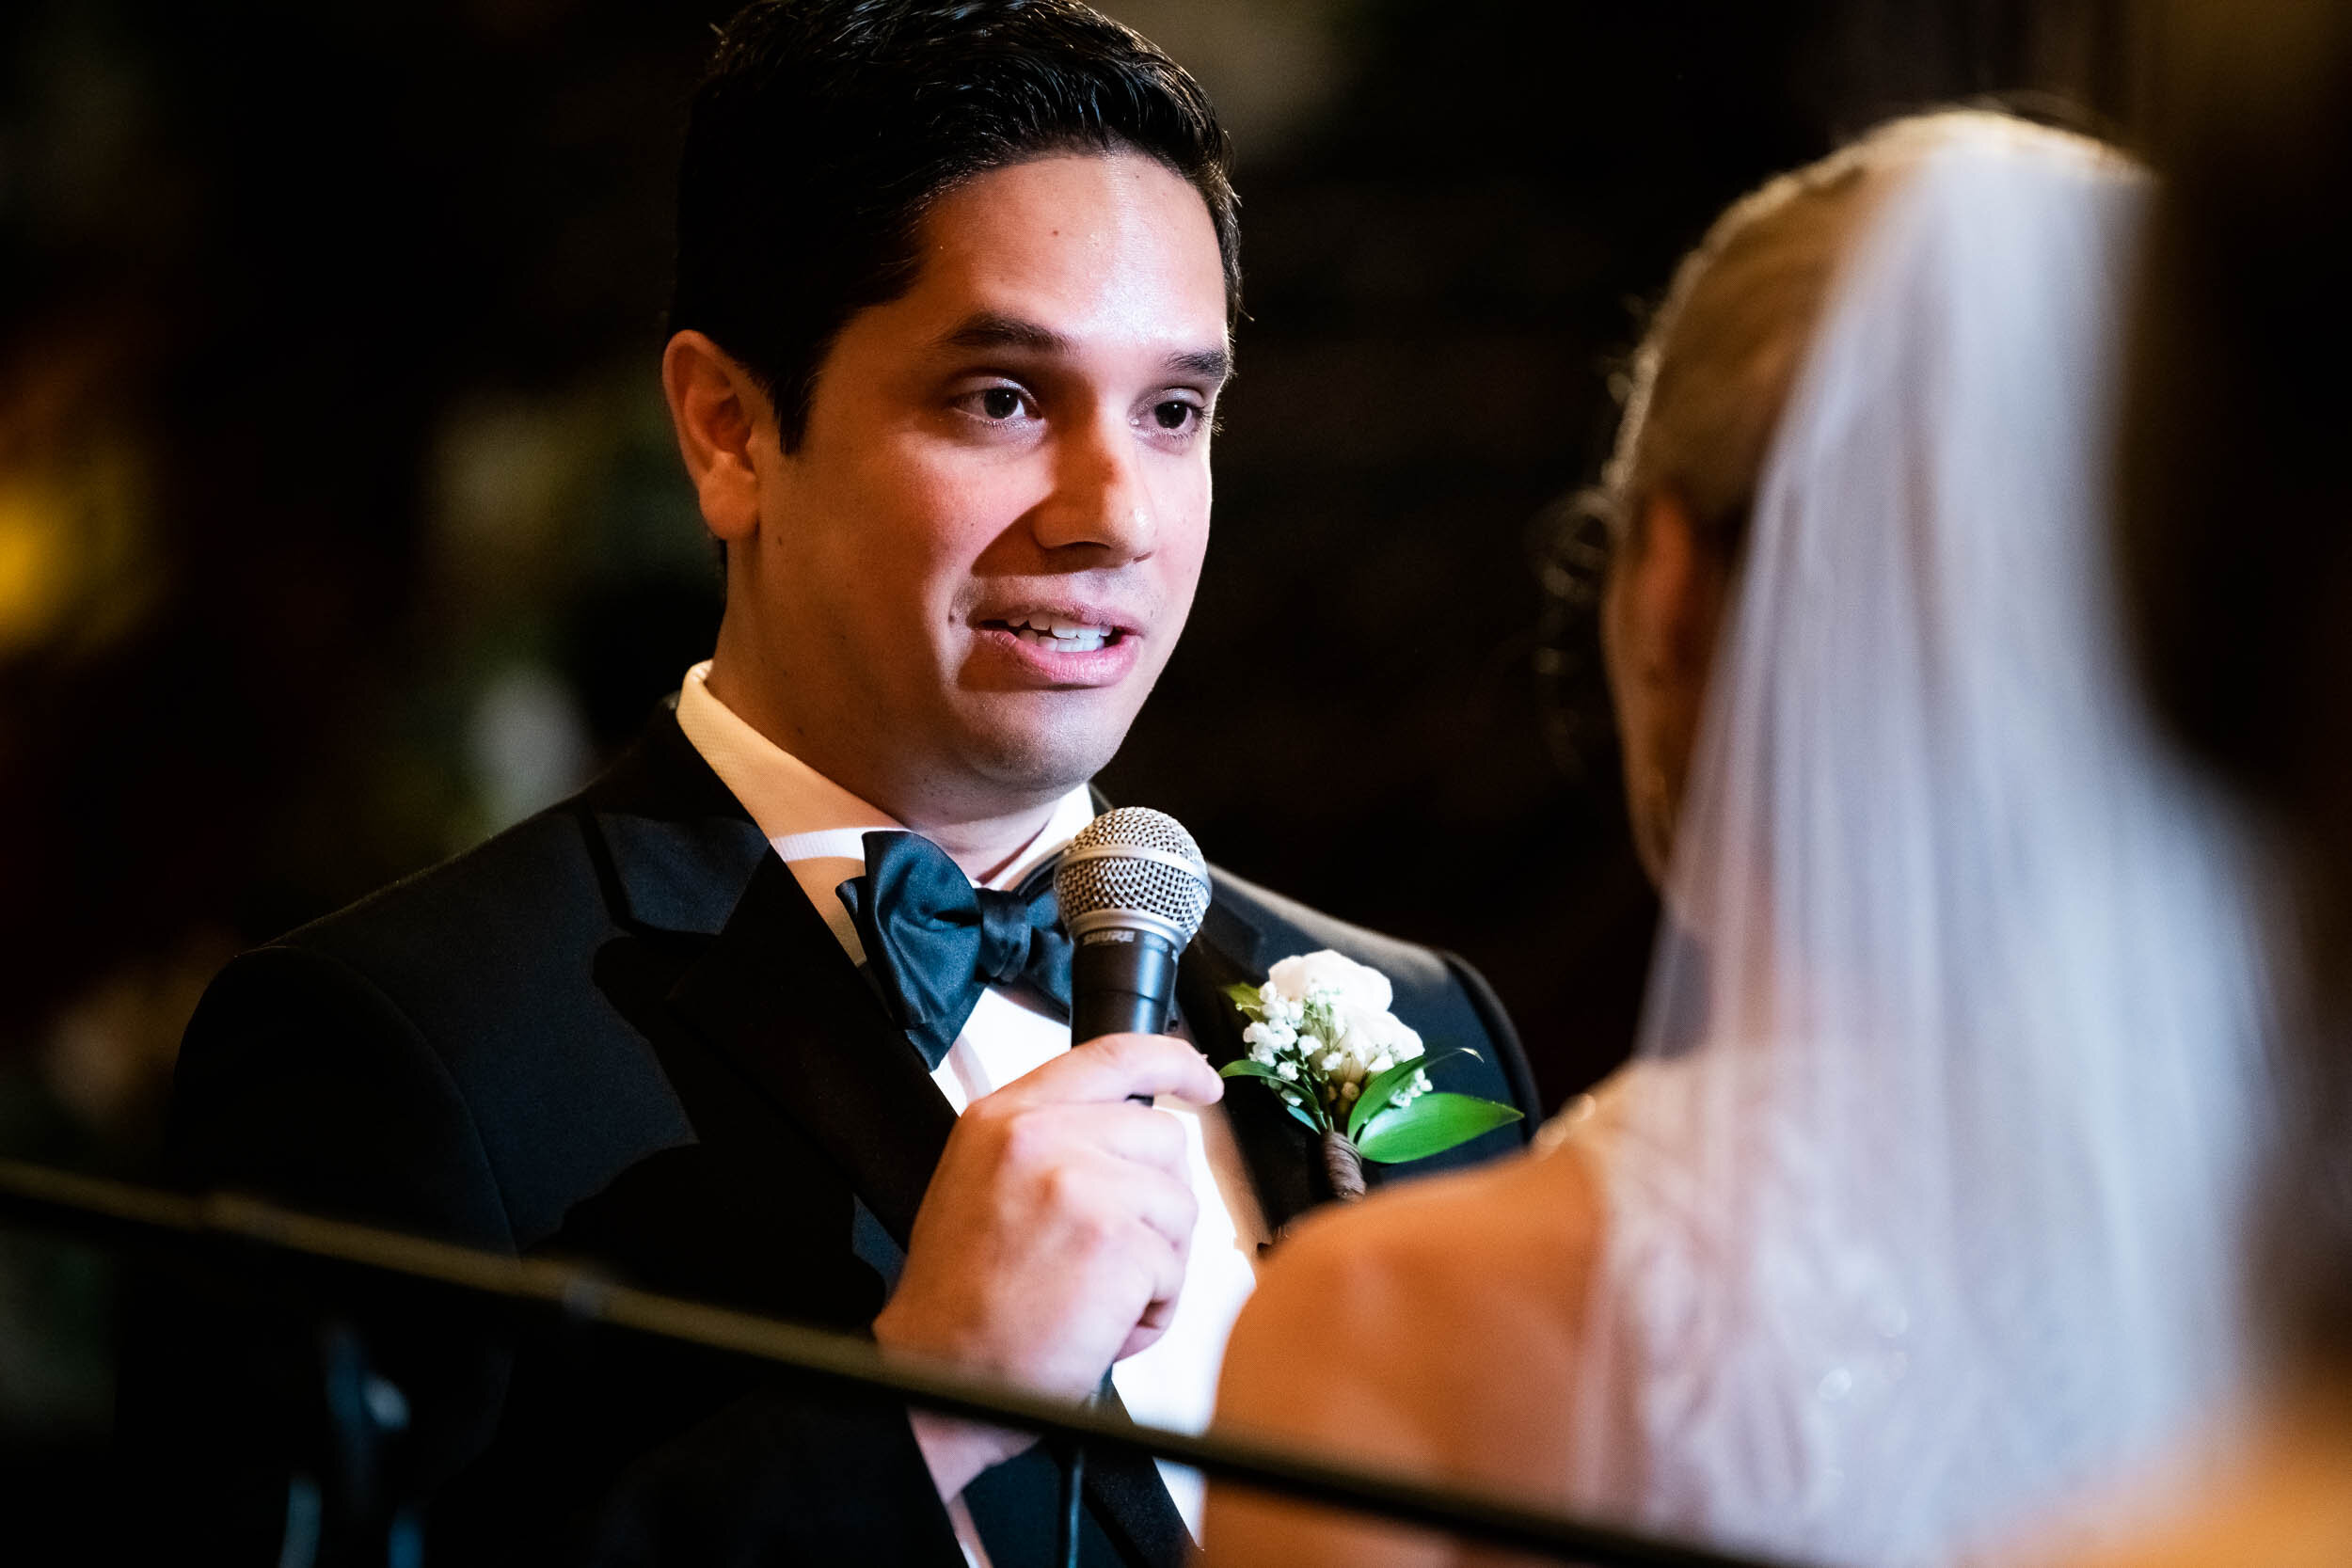 Groom sharing vows during wedding ceremony: Carnivale Chicago Wedding captured by J. Brown Photography